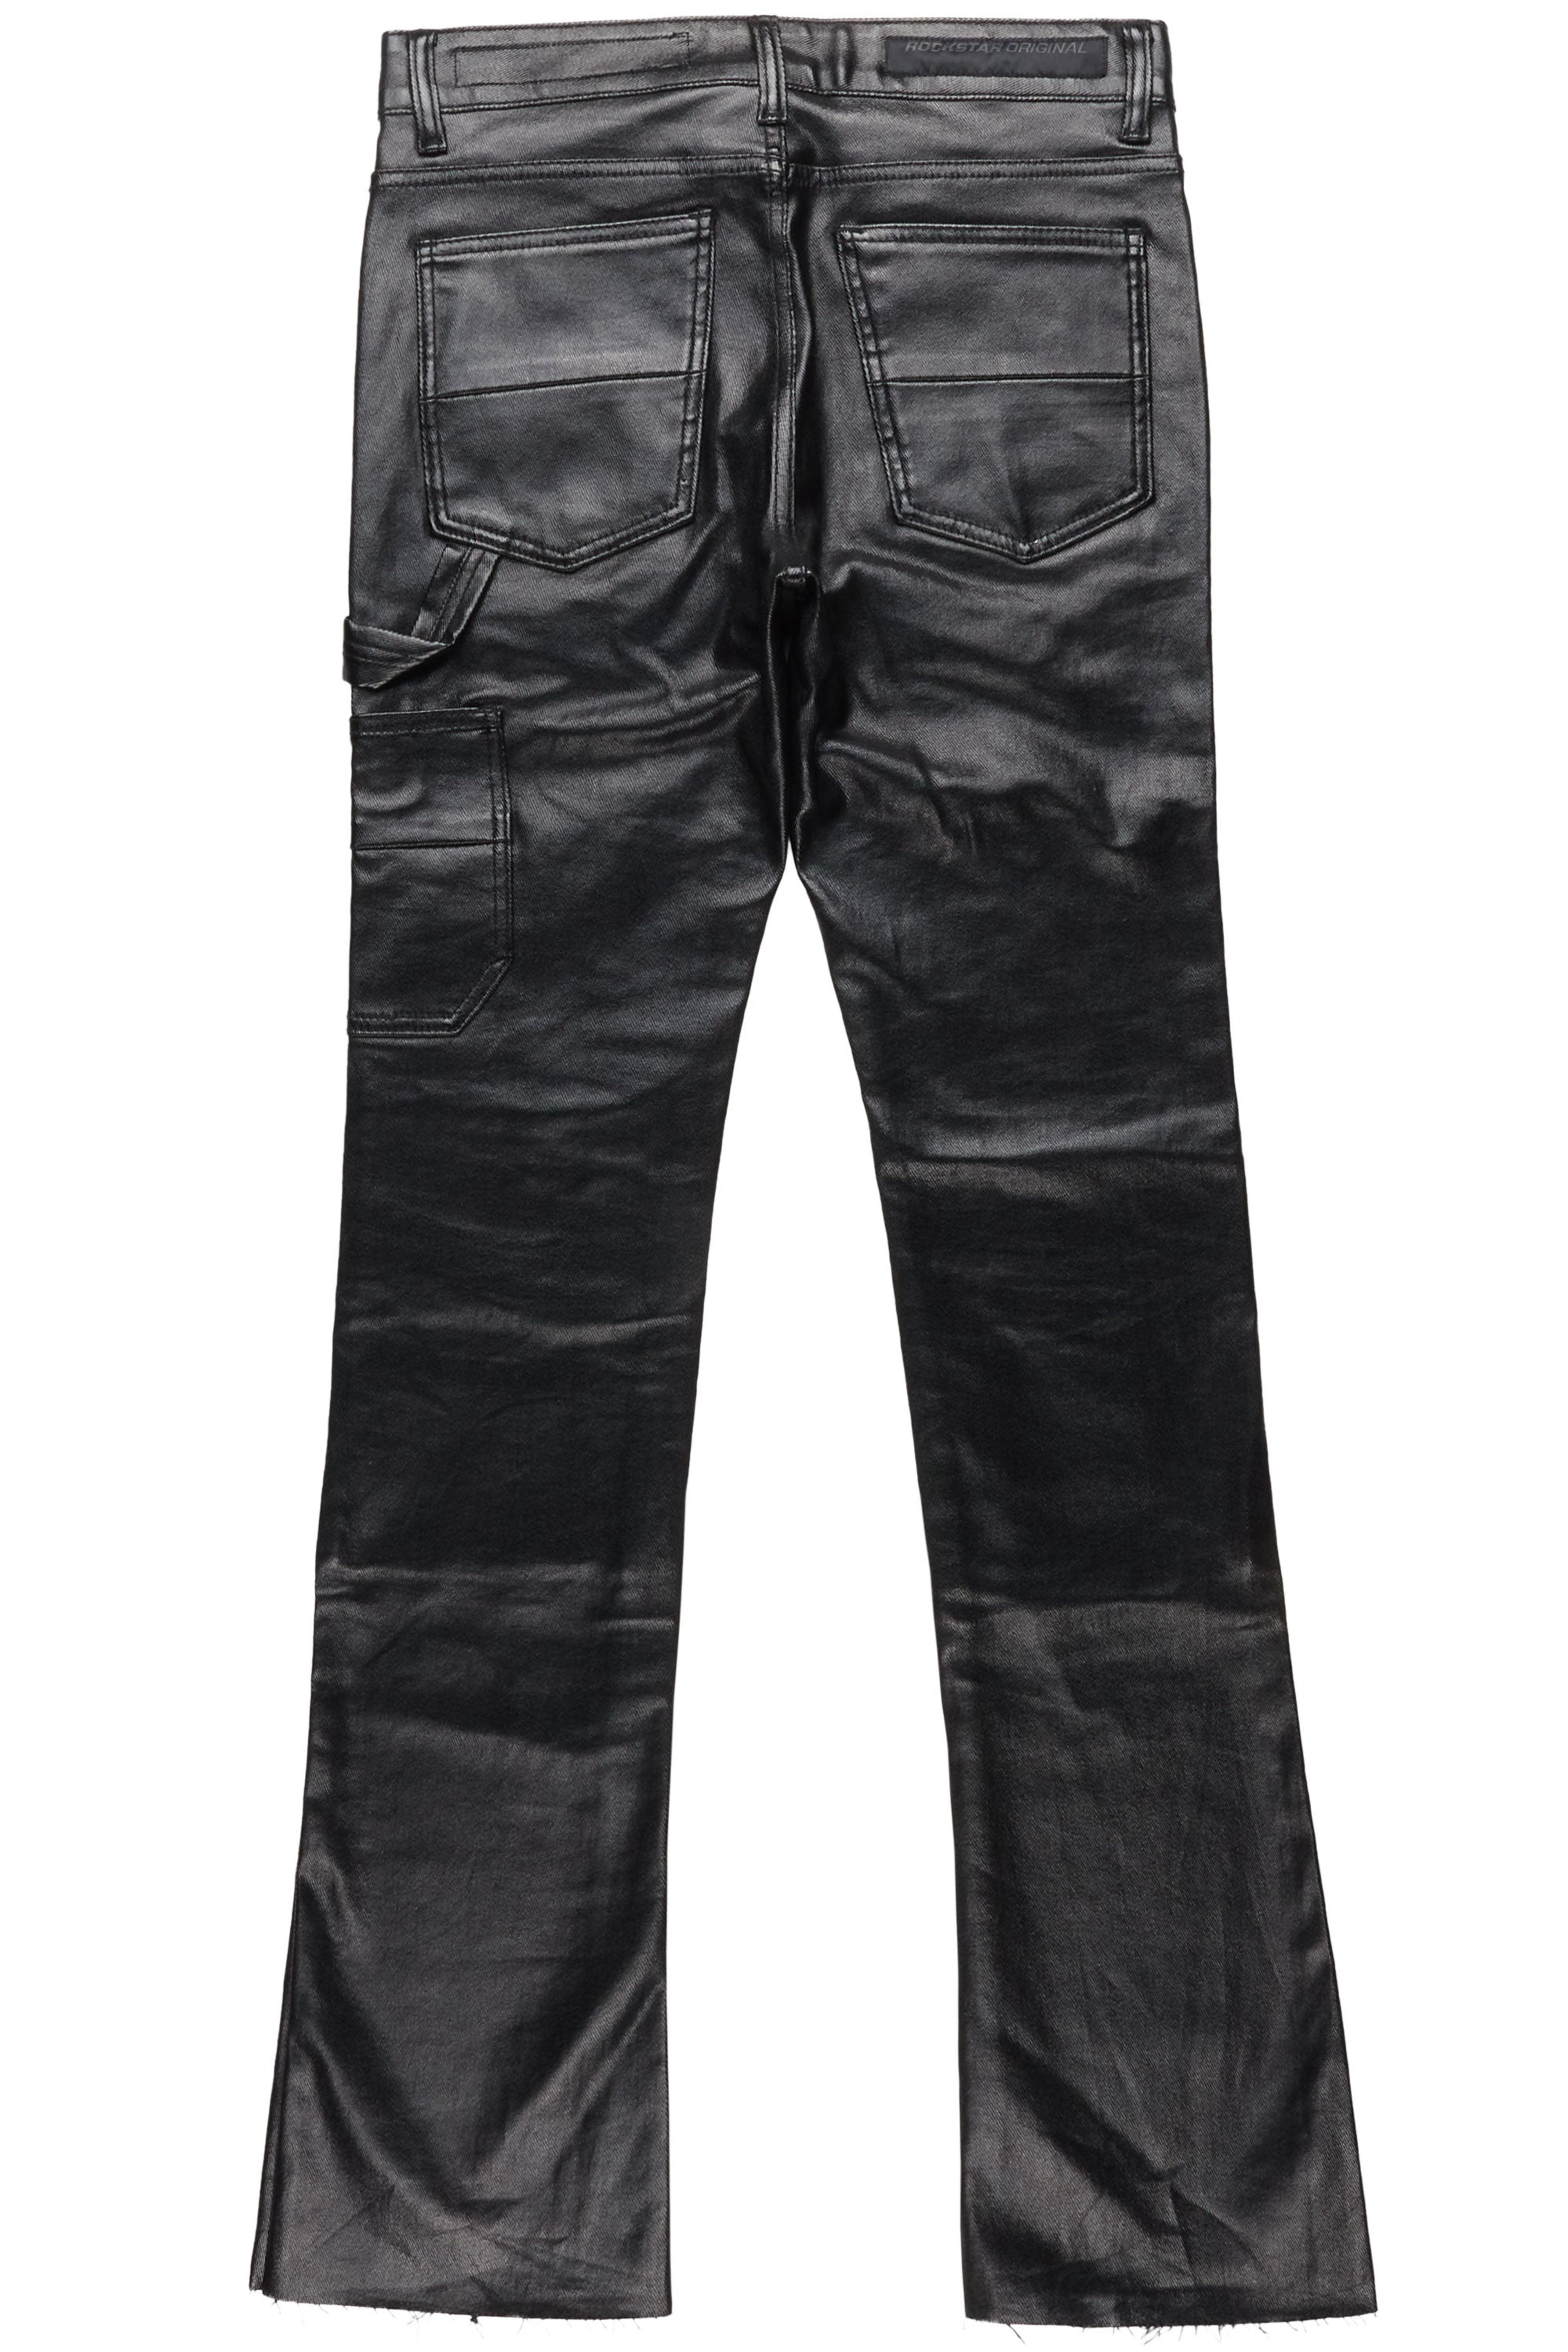 Alternate View 8 of Quartz Black Leather Stacked Flare Jean